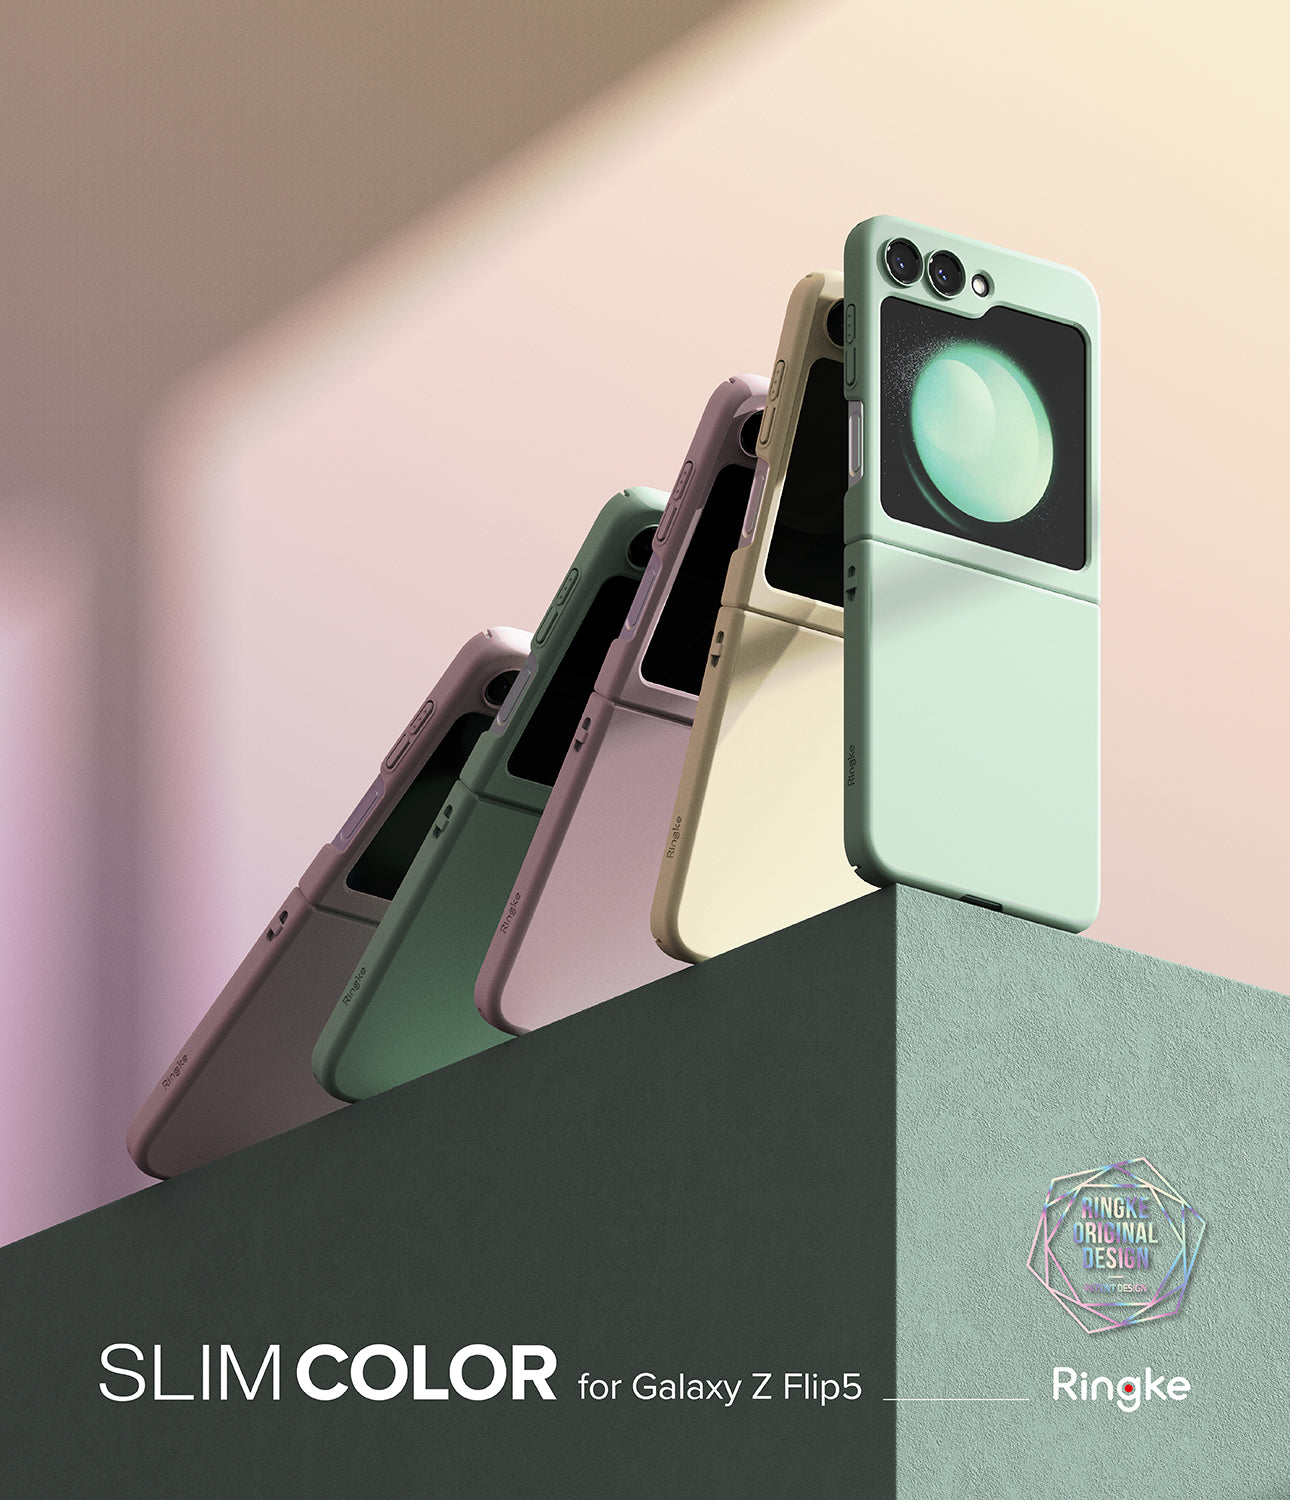 5s phone colors